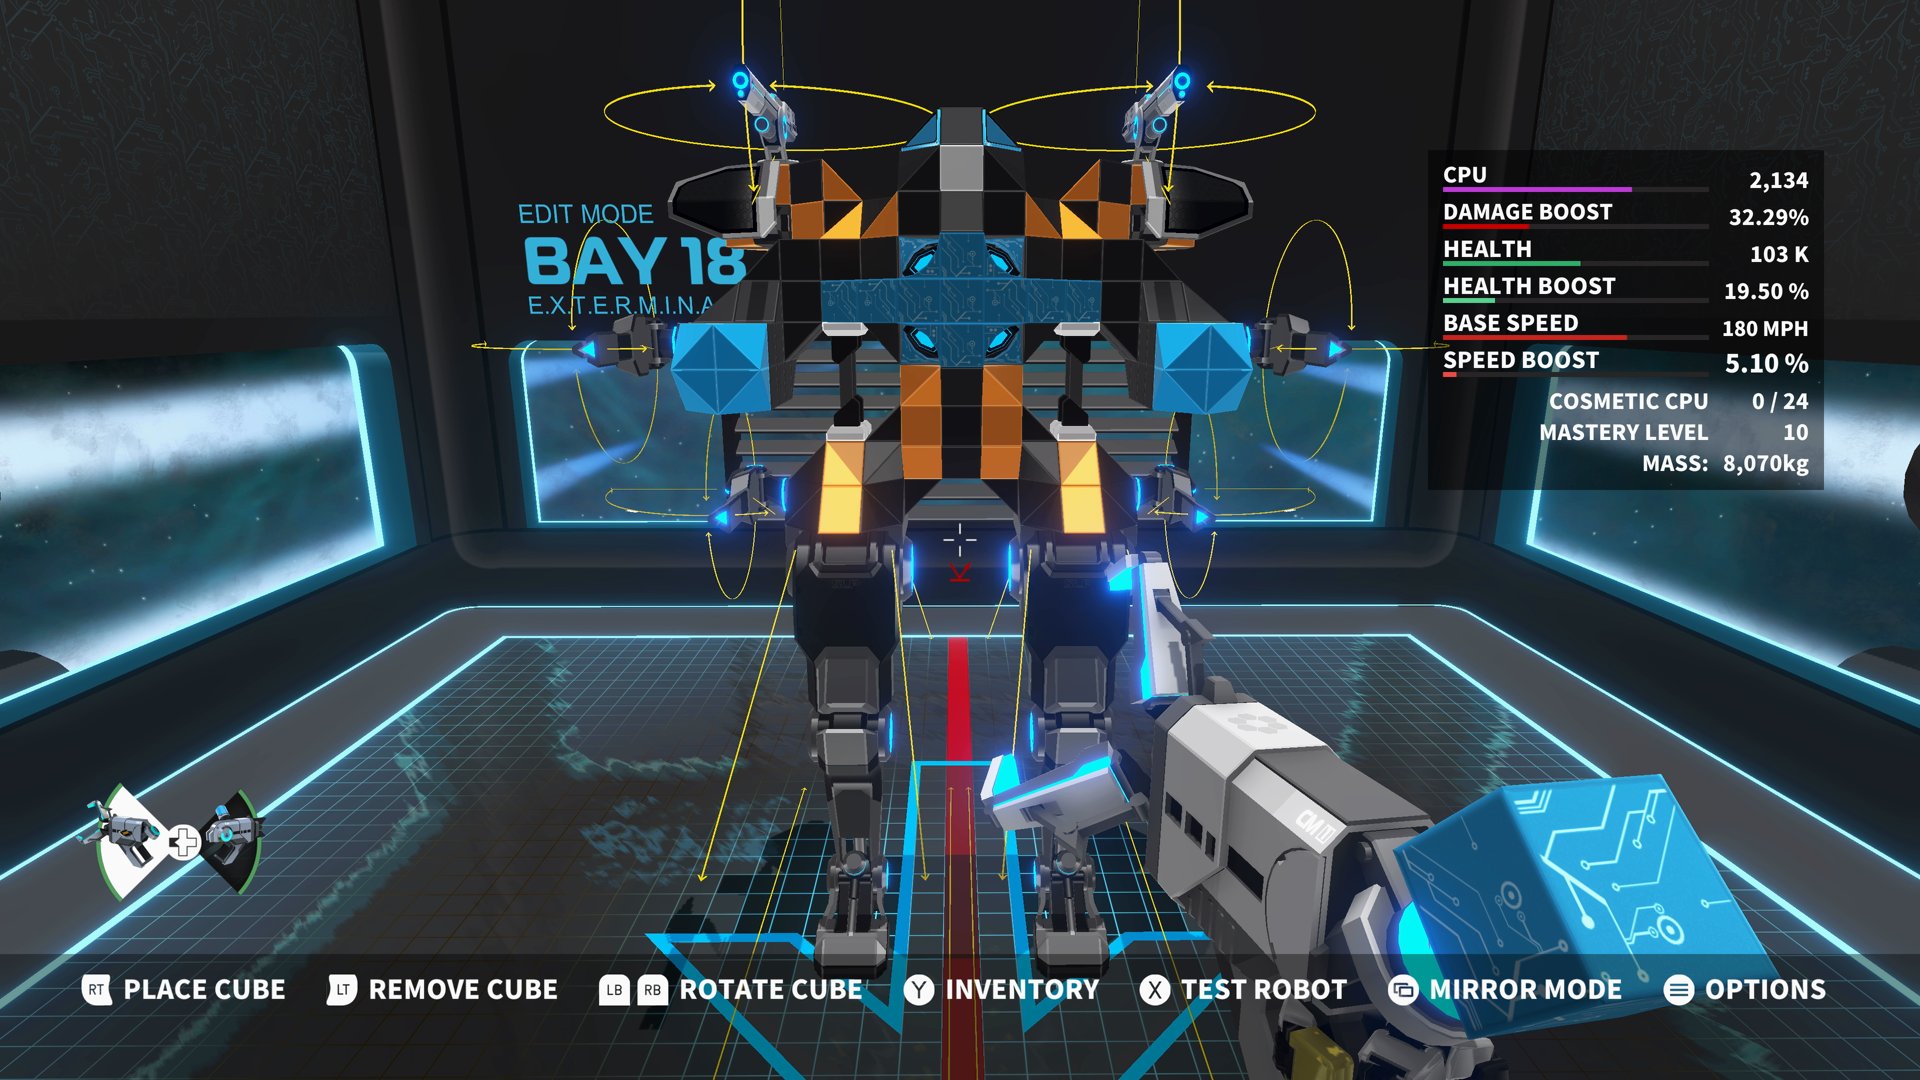 Prepare to Get Started in Robocraft Infinity, Coming Soon to Xbox One and Windows 10